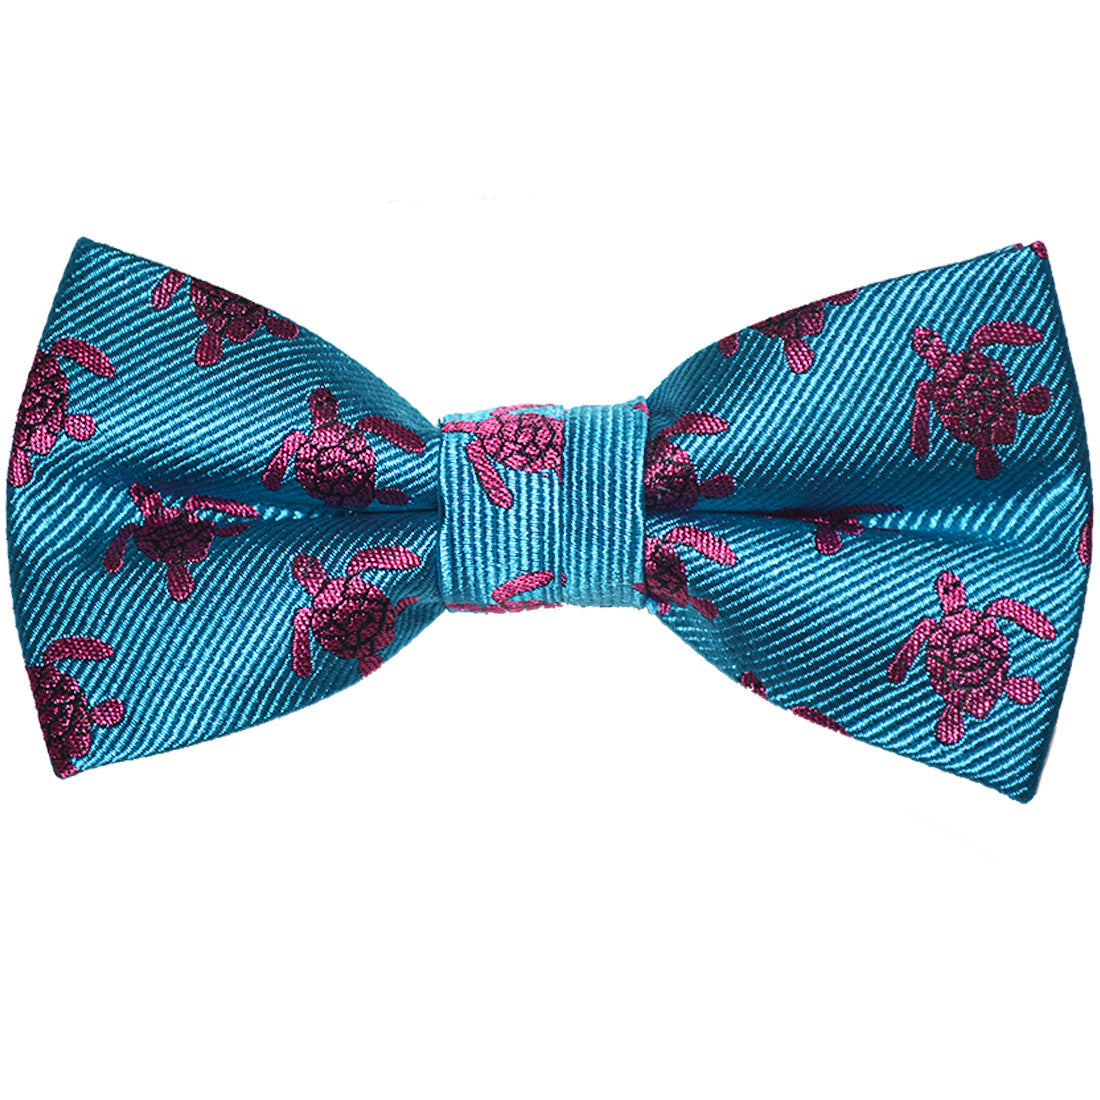 Turtle Bow Tie - Pink on Blue, Woven Silk, Pre-Tied for Kids - SummerTies